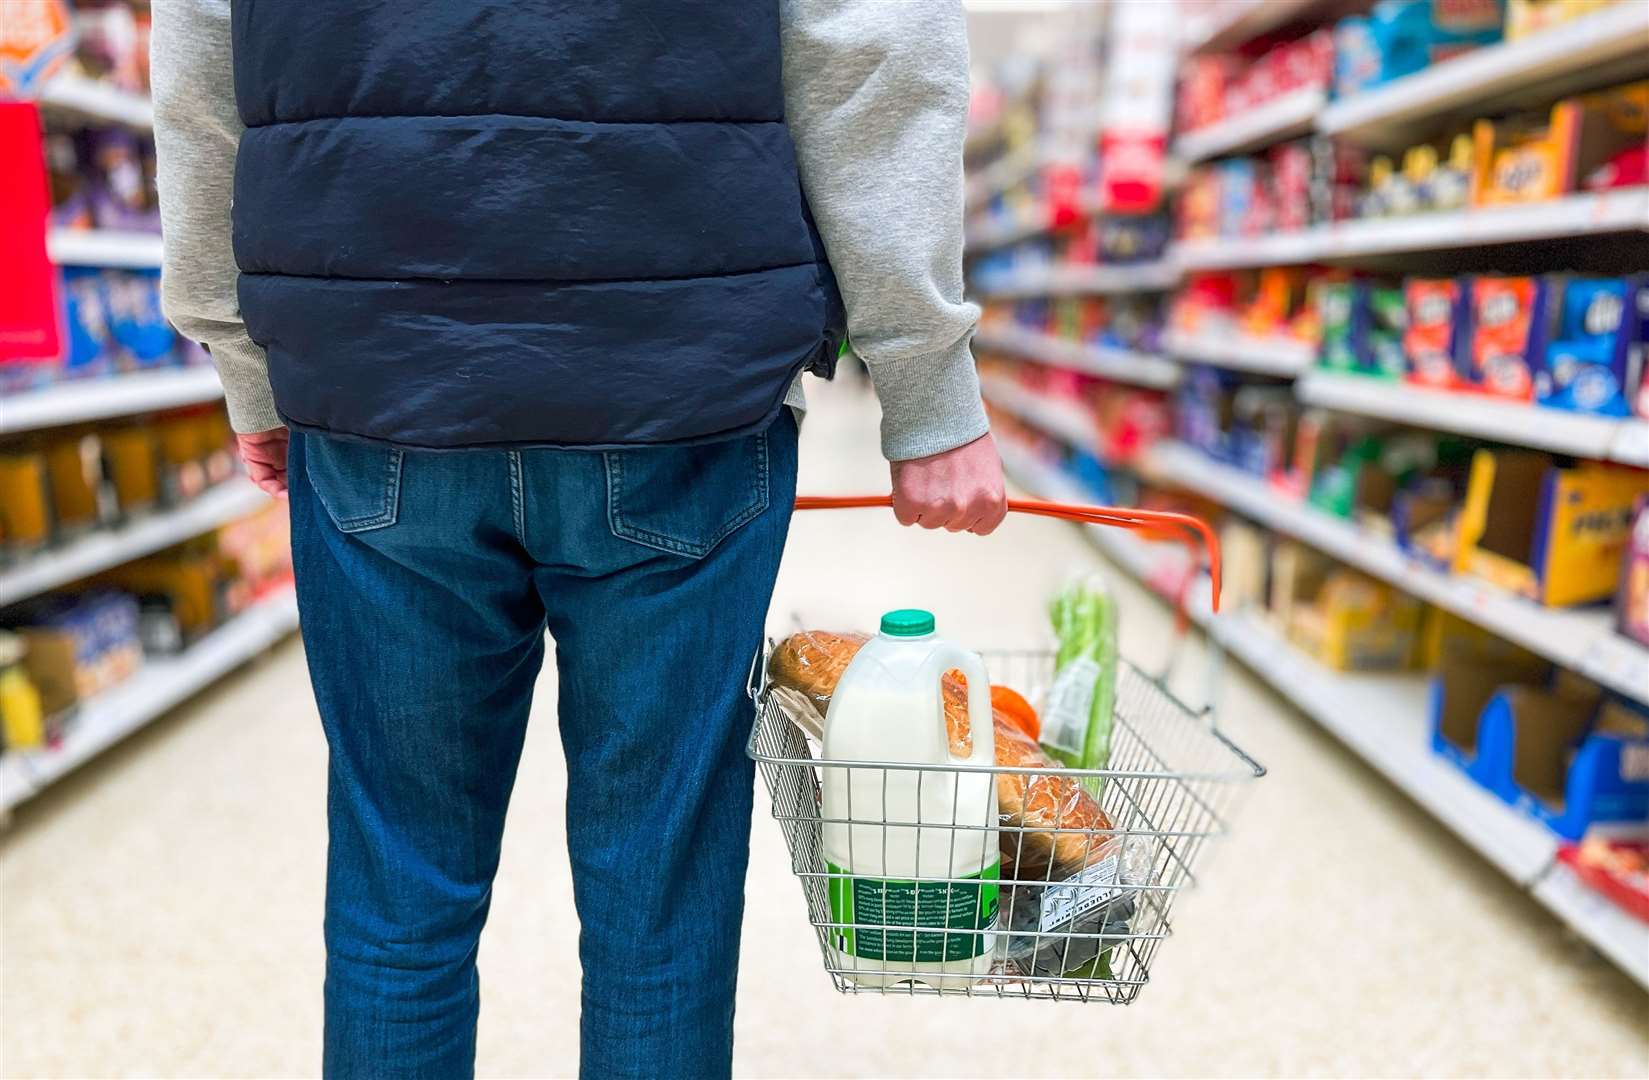 There is pressure on supermarkets to help cut food waste. Image: Stock photo.